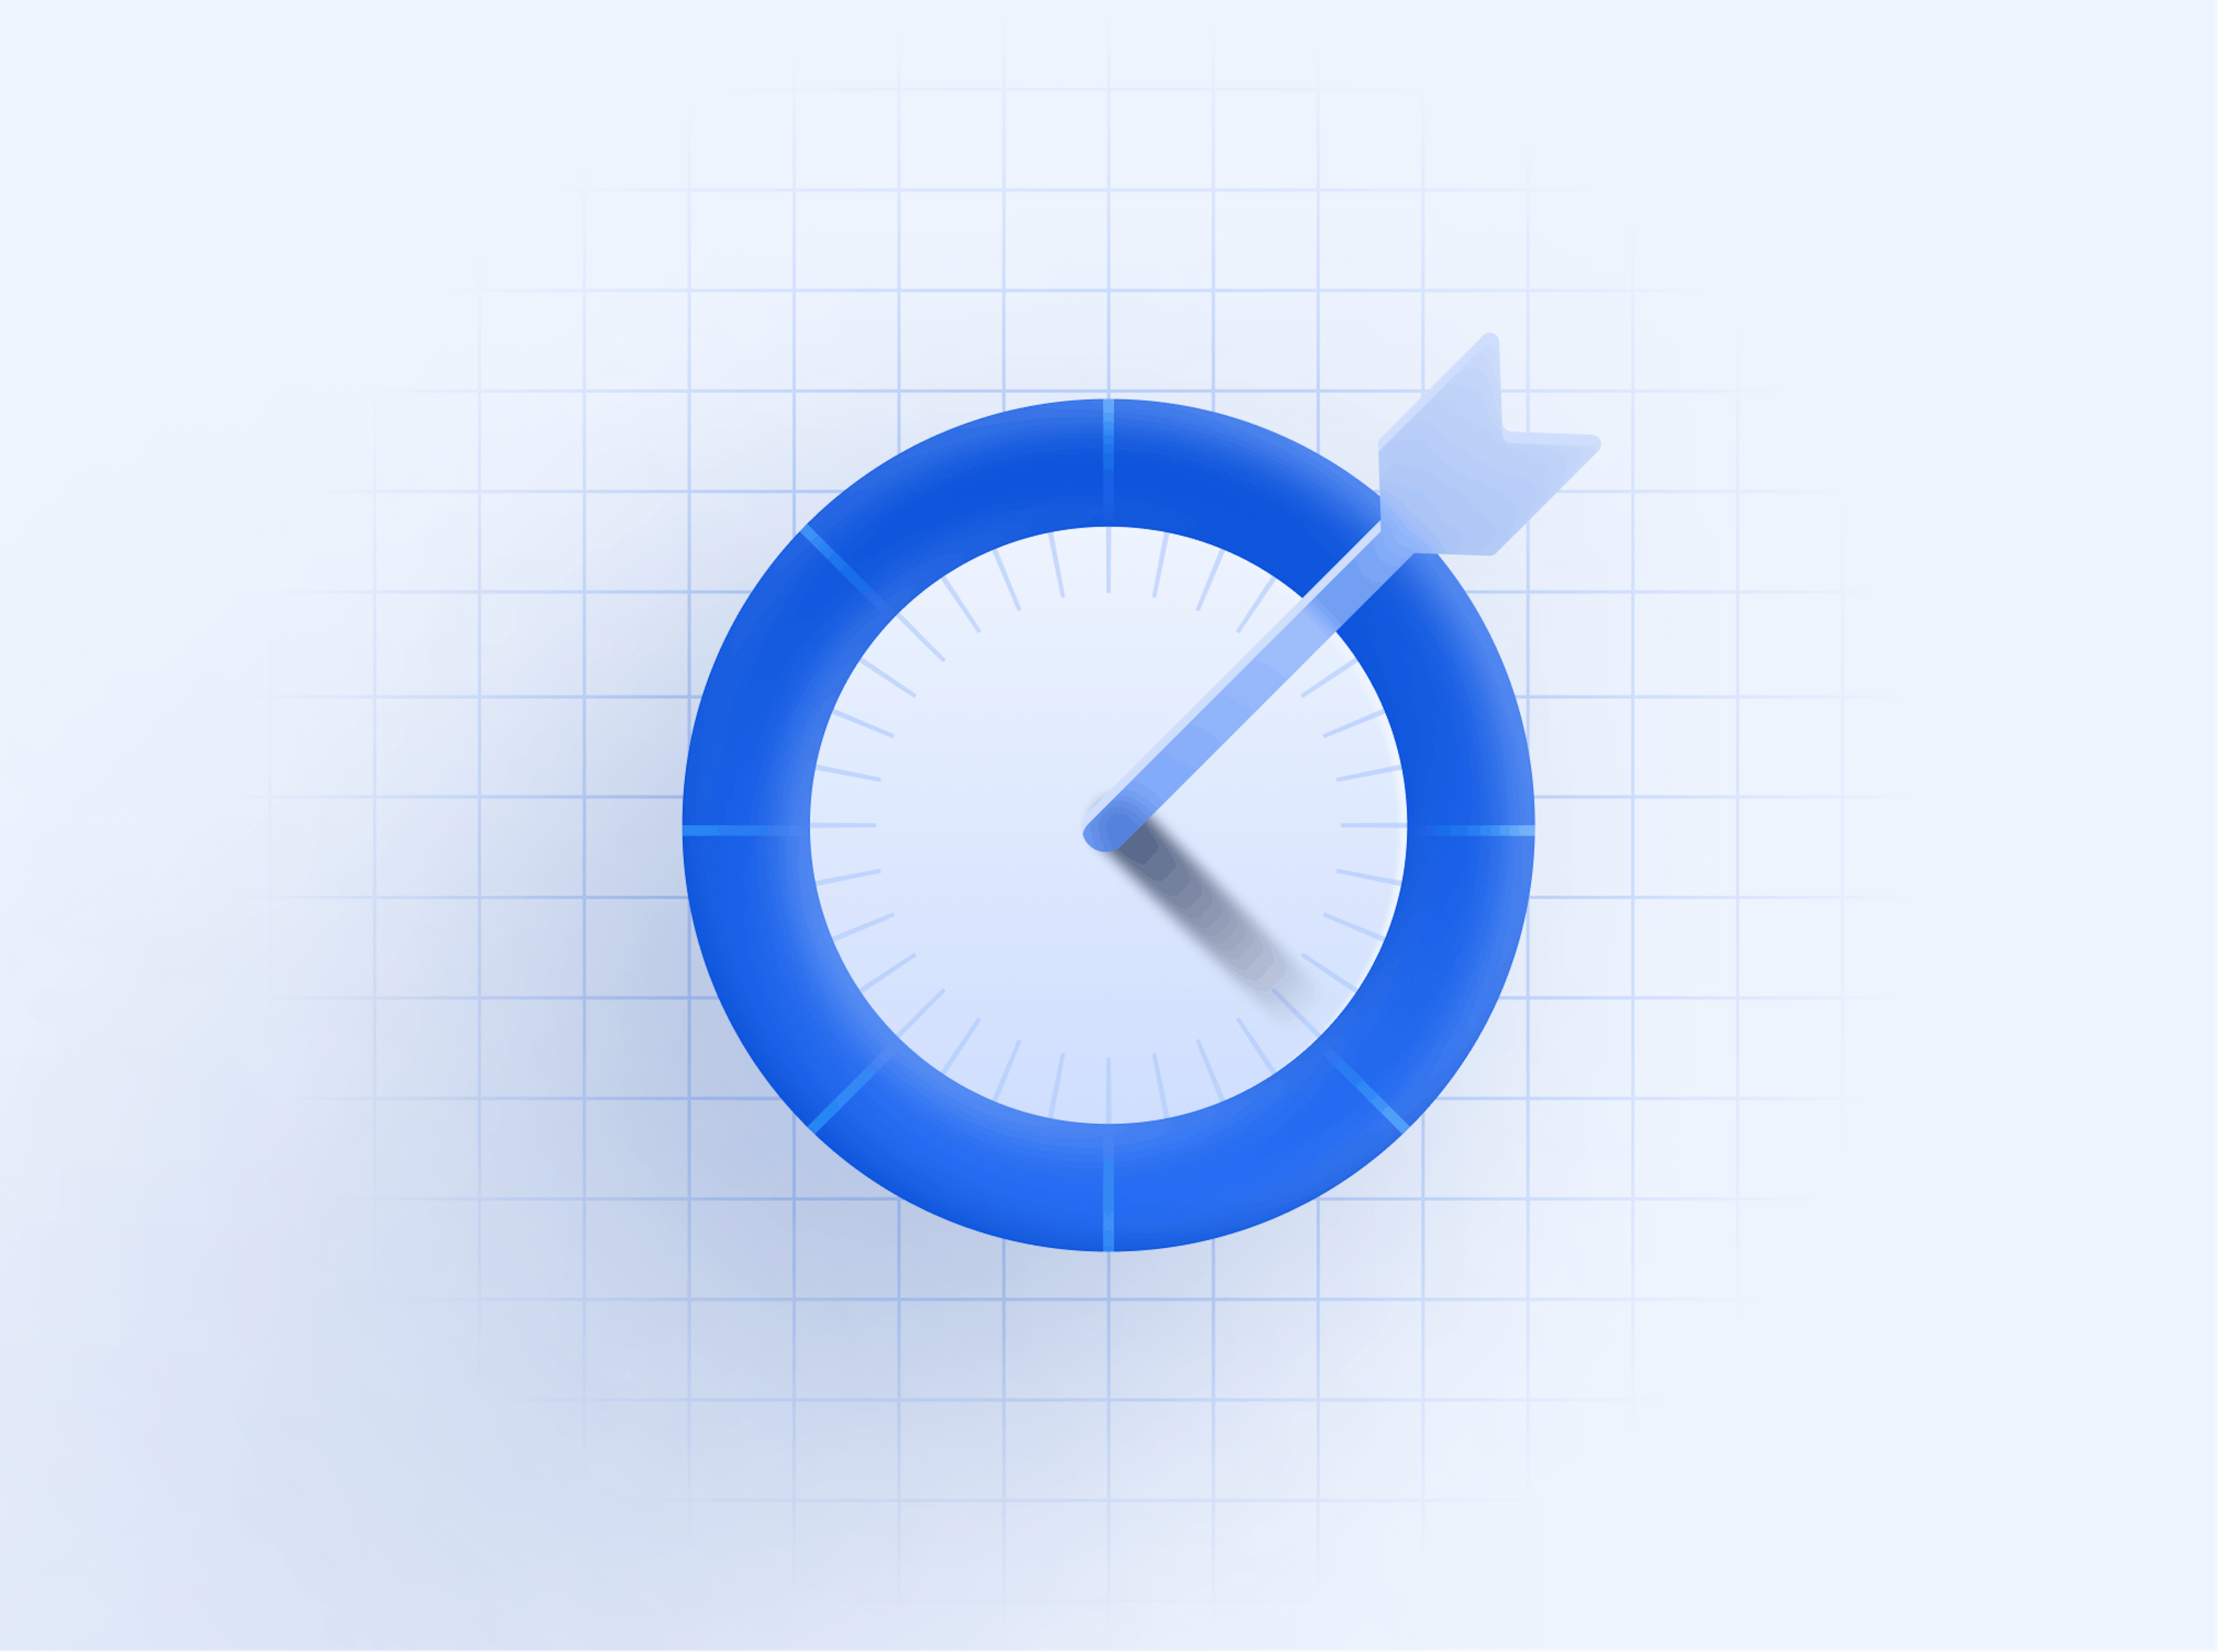 Blue clock face with blue surround and an arrow through the middle